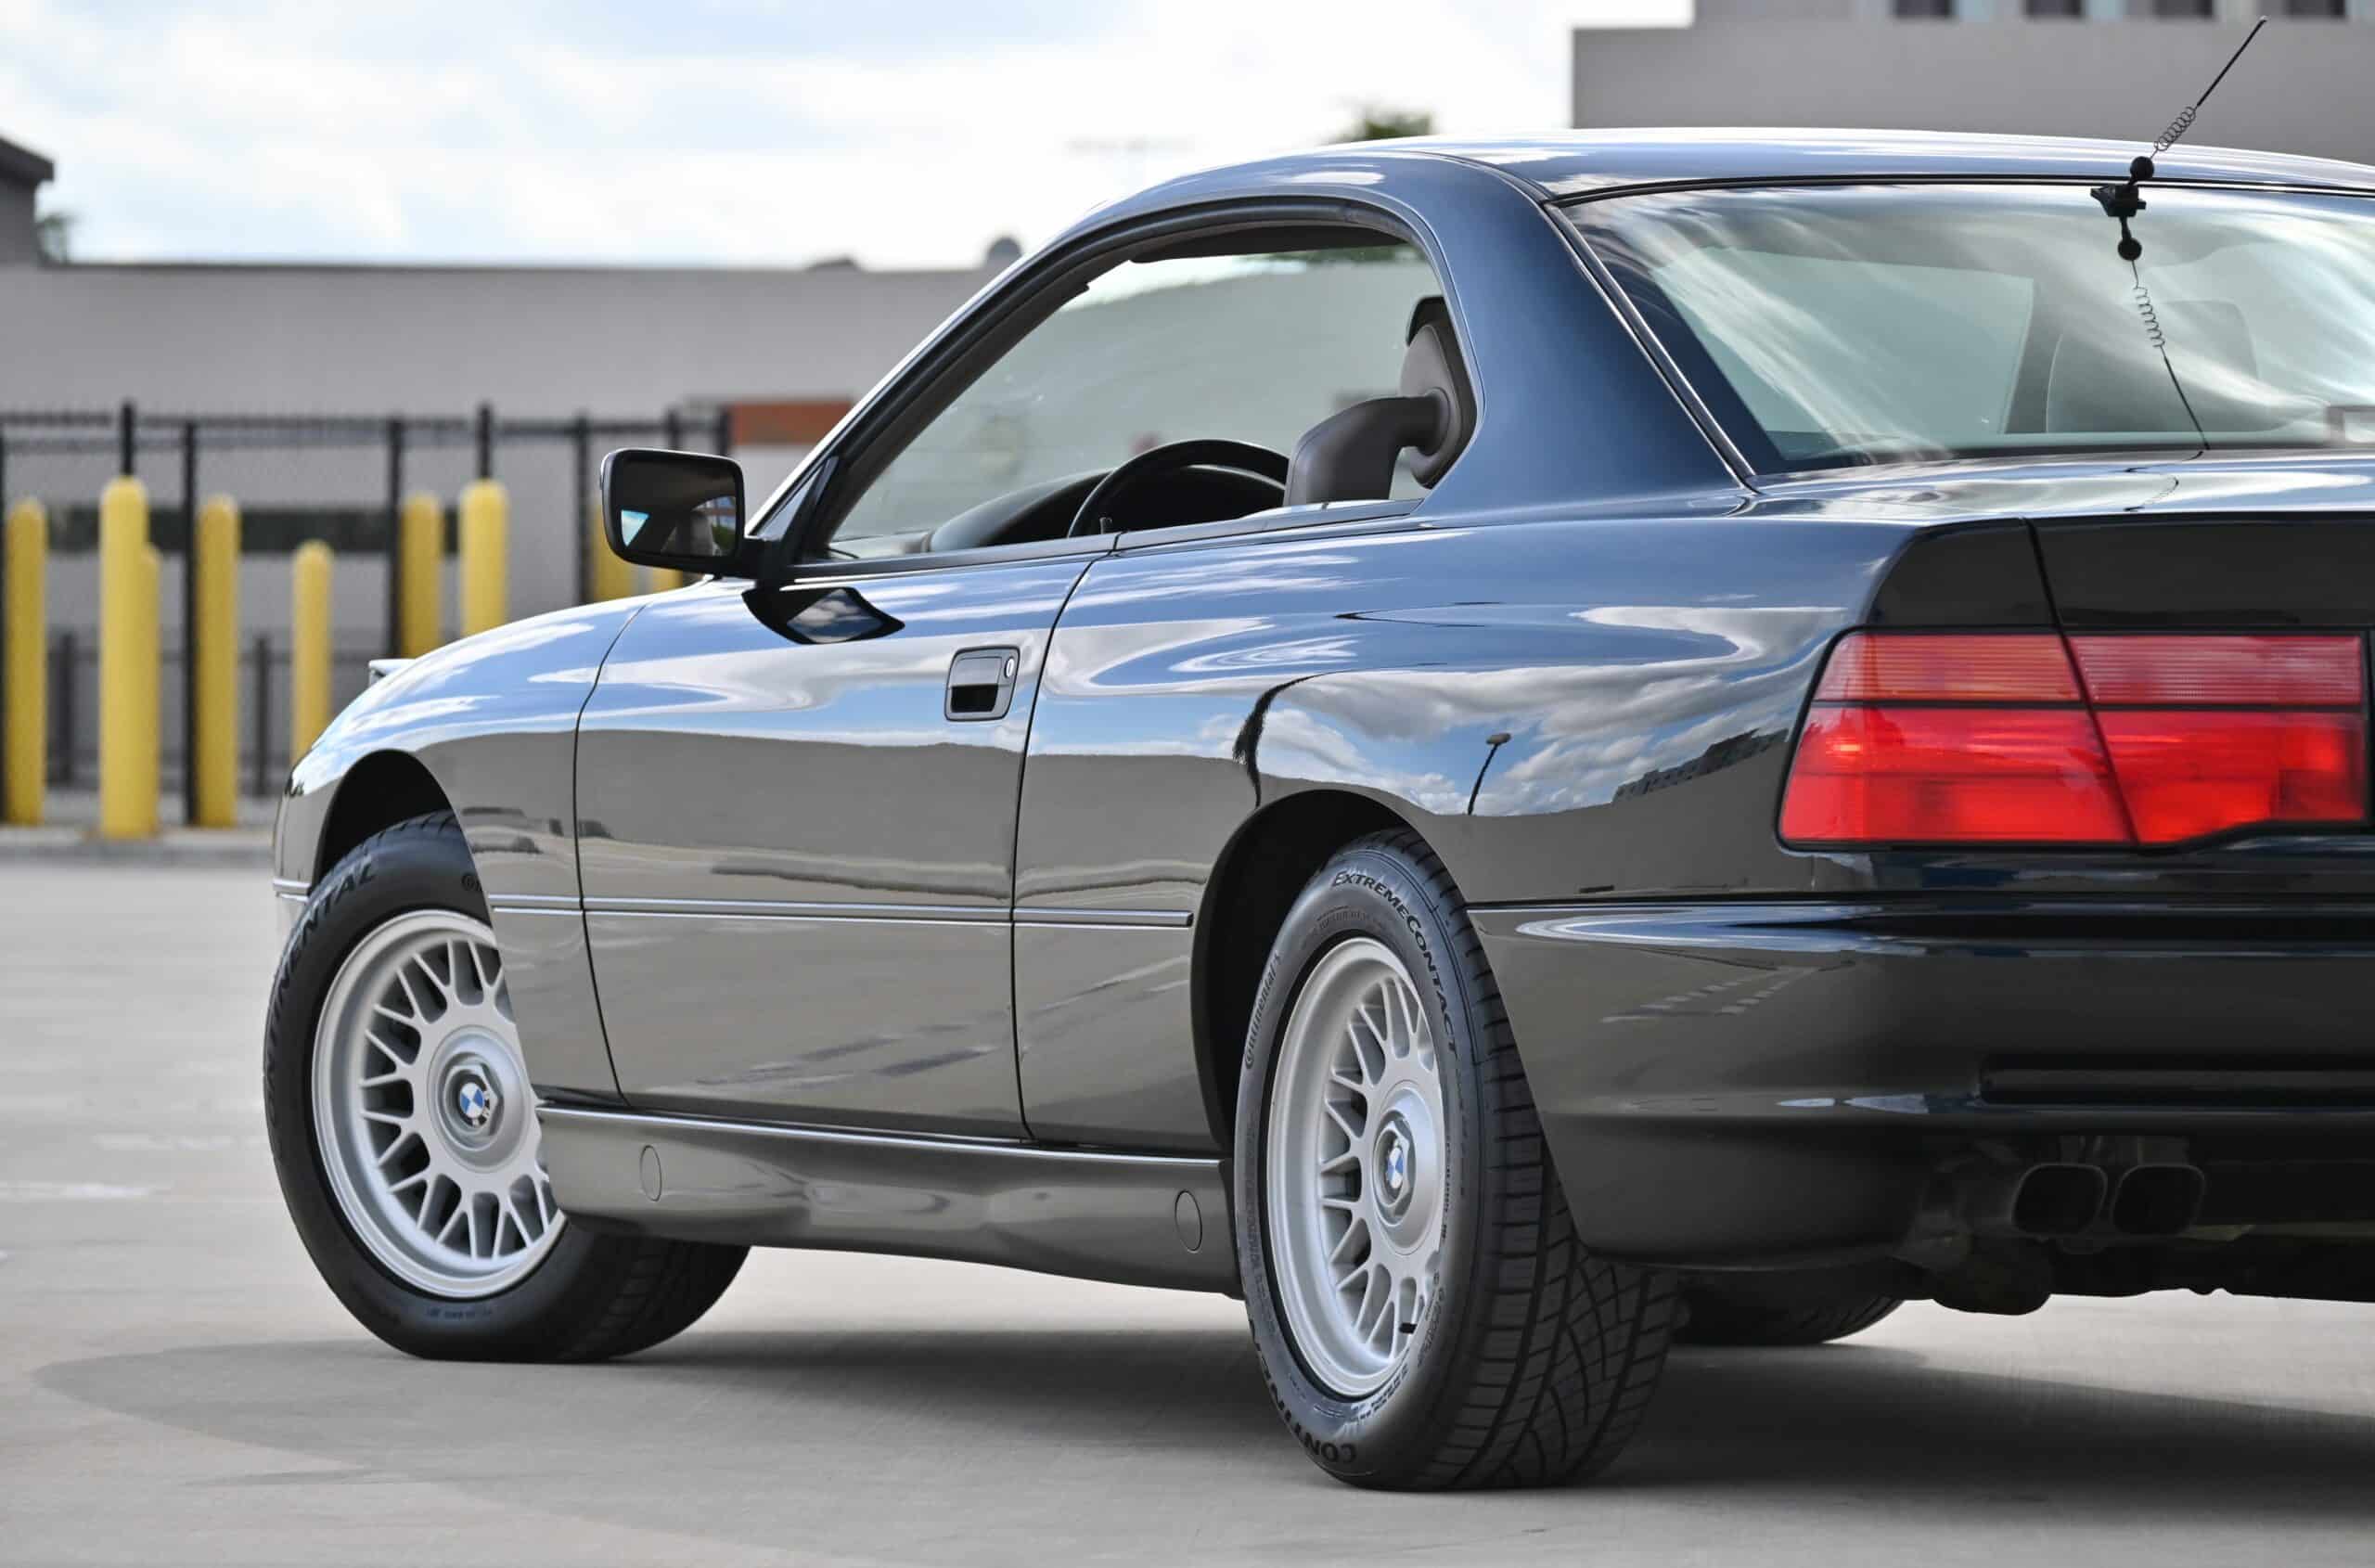 1991 BMW E31 850i 1 Family Owned-LOW 60K MILES – Stock – Excellent condition-Recent $7,000 Service